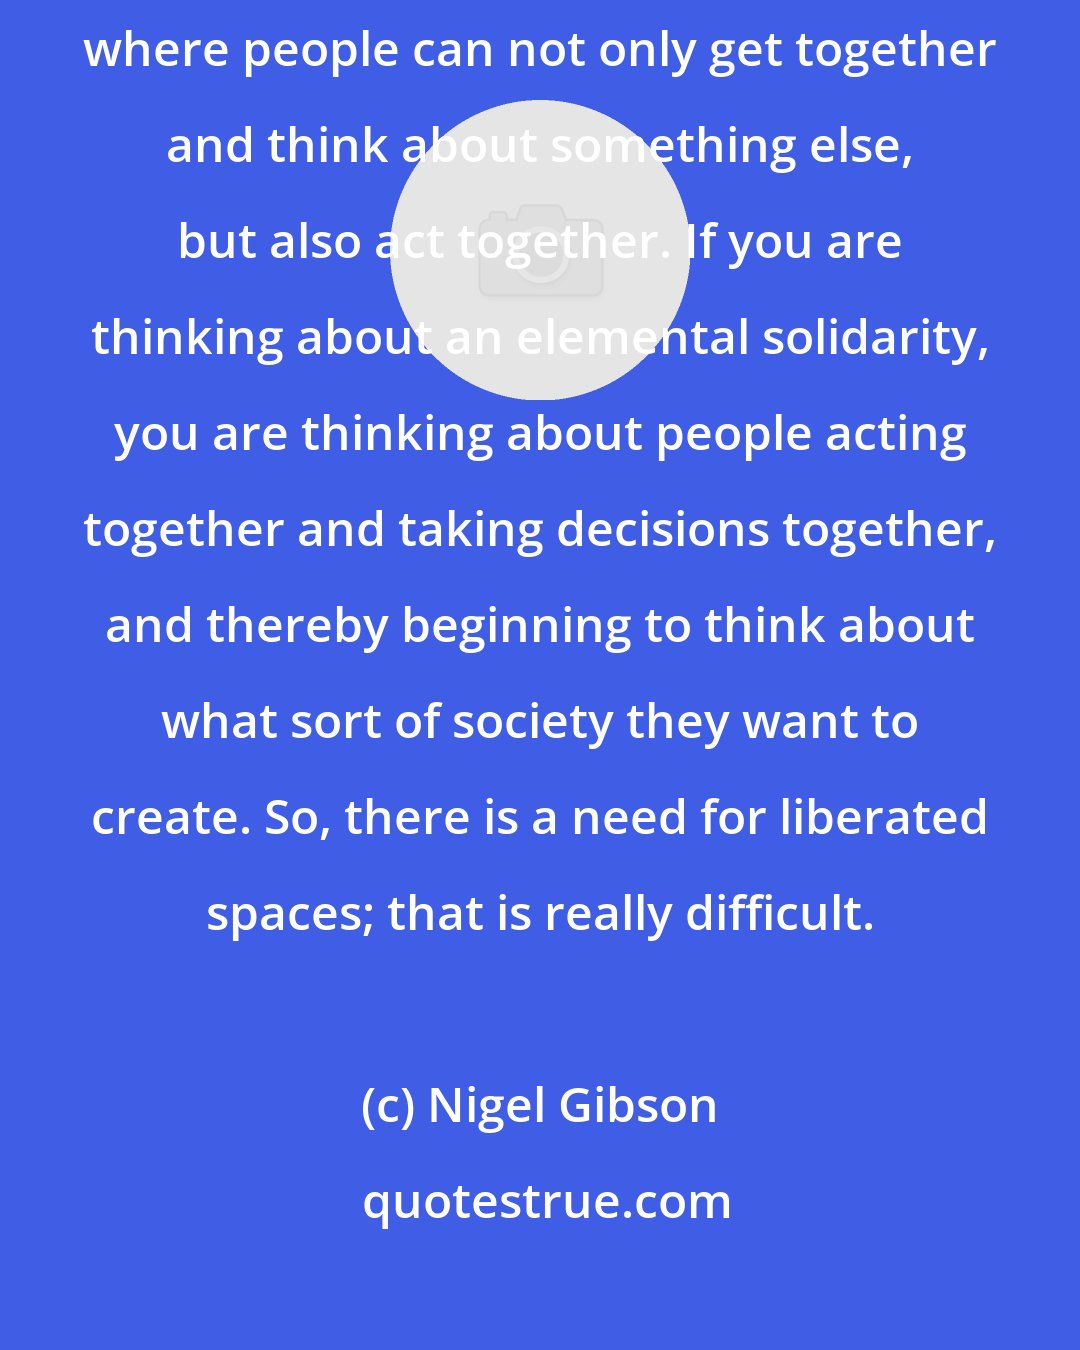 Nigel Gibson: Spaces of liberation are, in a certain way, some kind of social spaces where people can not only get together and think about something else, but also act together. If you are thinking about an elemental solidarity, you are thinking about people acting together and taking decisions together, and thereby beginning to think about what sort of society they want to create. So, there is a need for liberated spaces; that is really difficult.